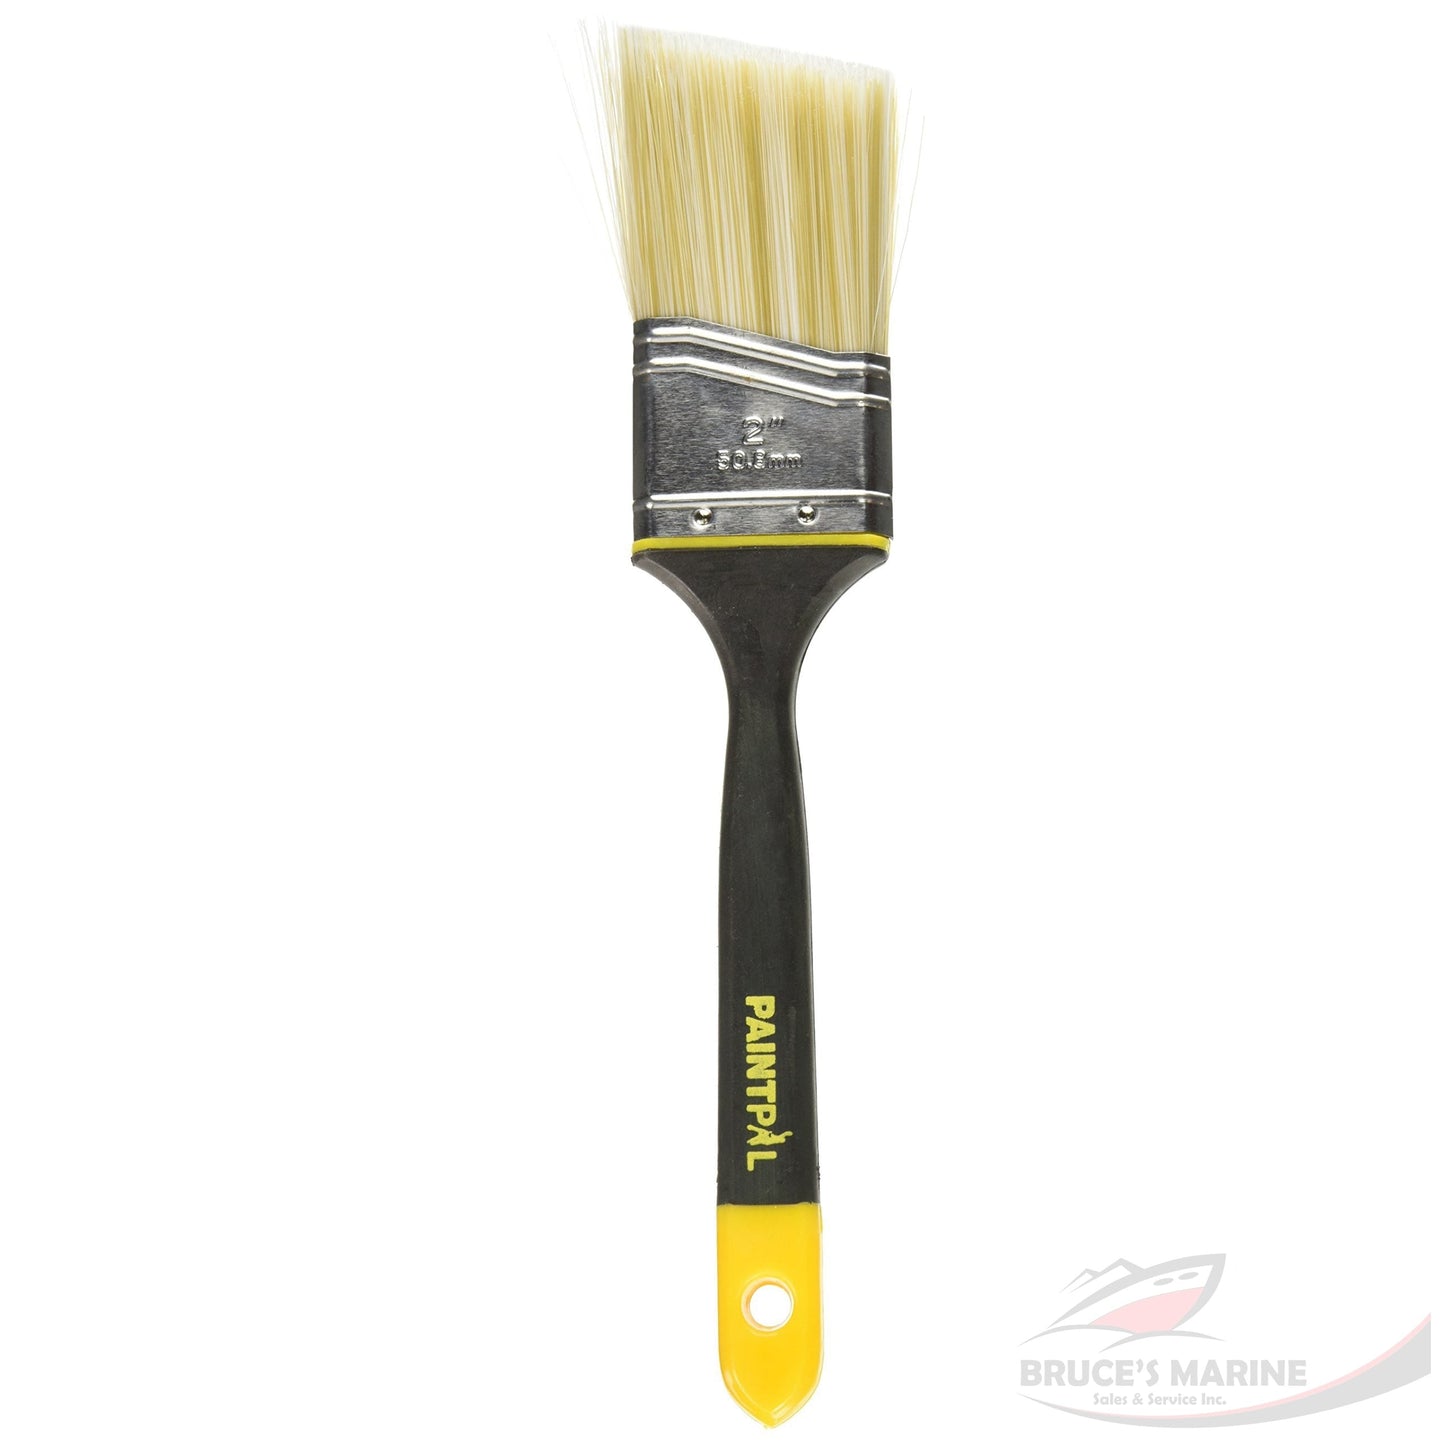 Paint Scentsations Polyester Angled Brush